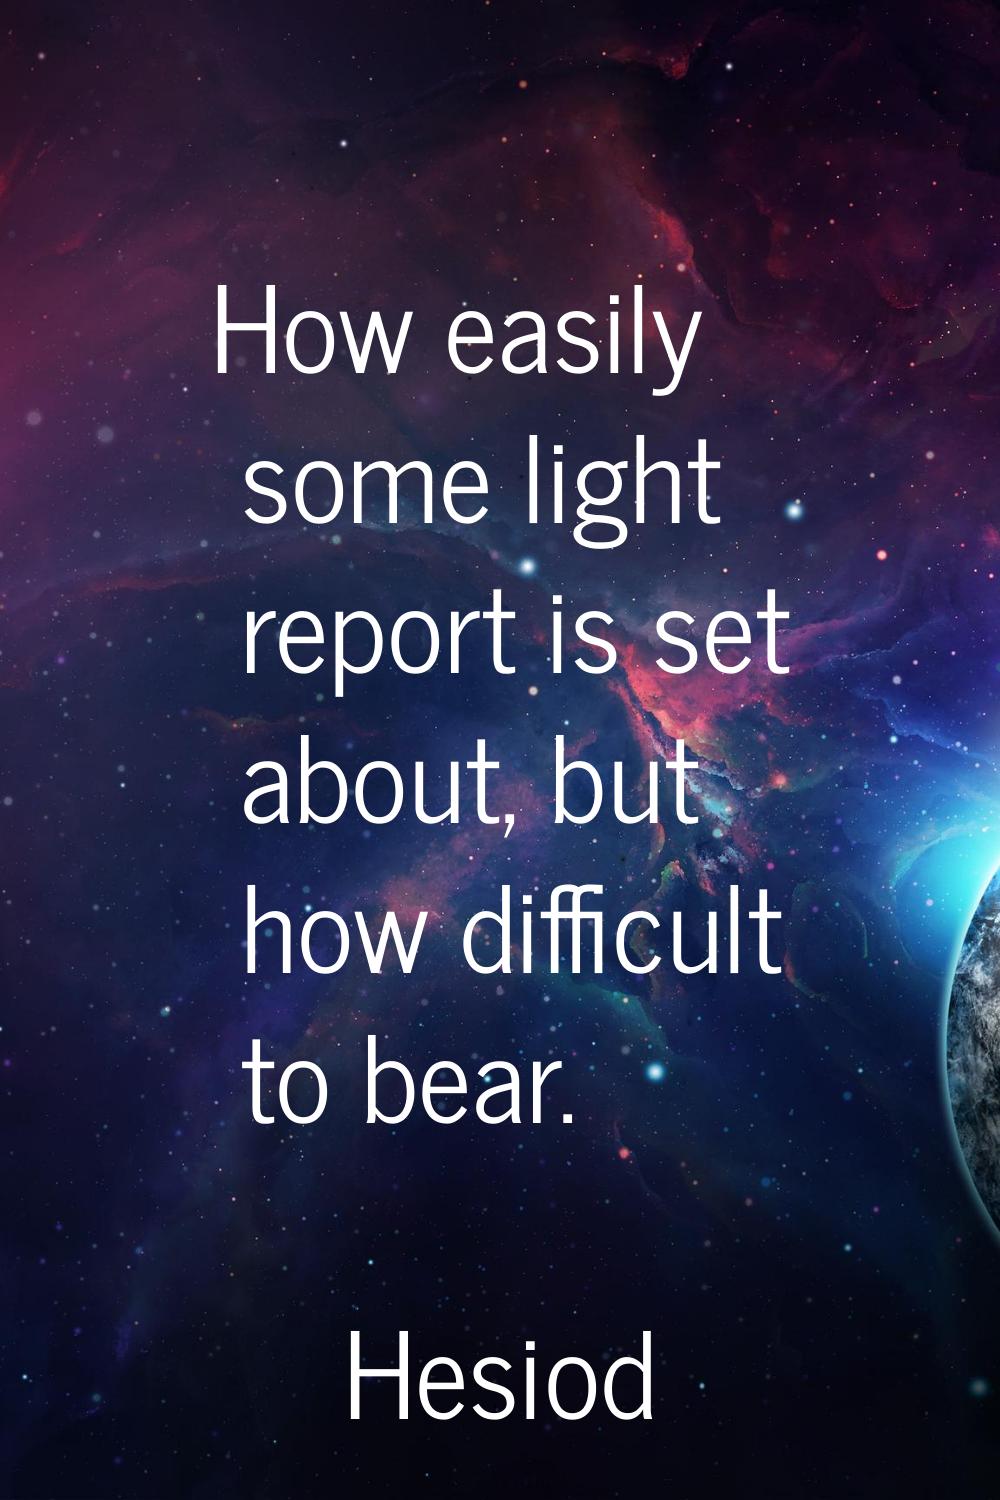 How easily some light report is set about, but how difficult to bear.